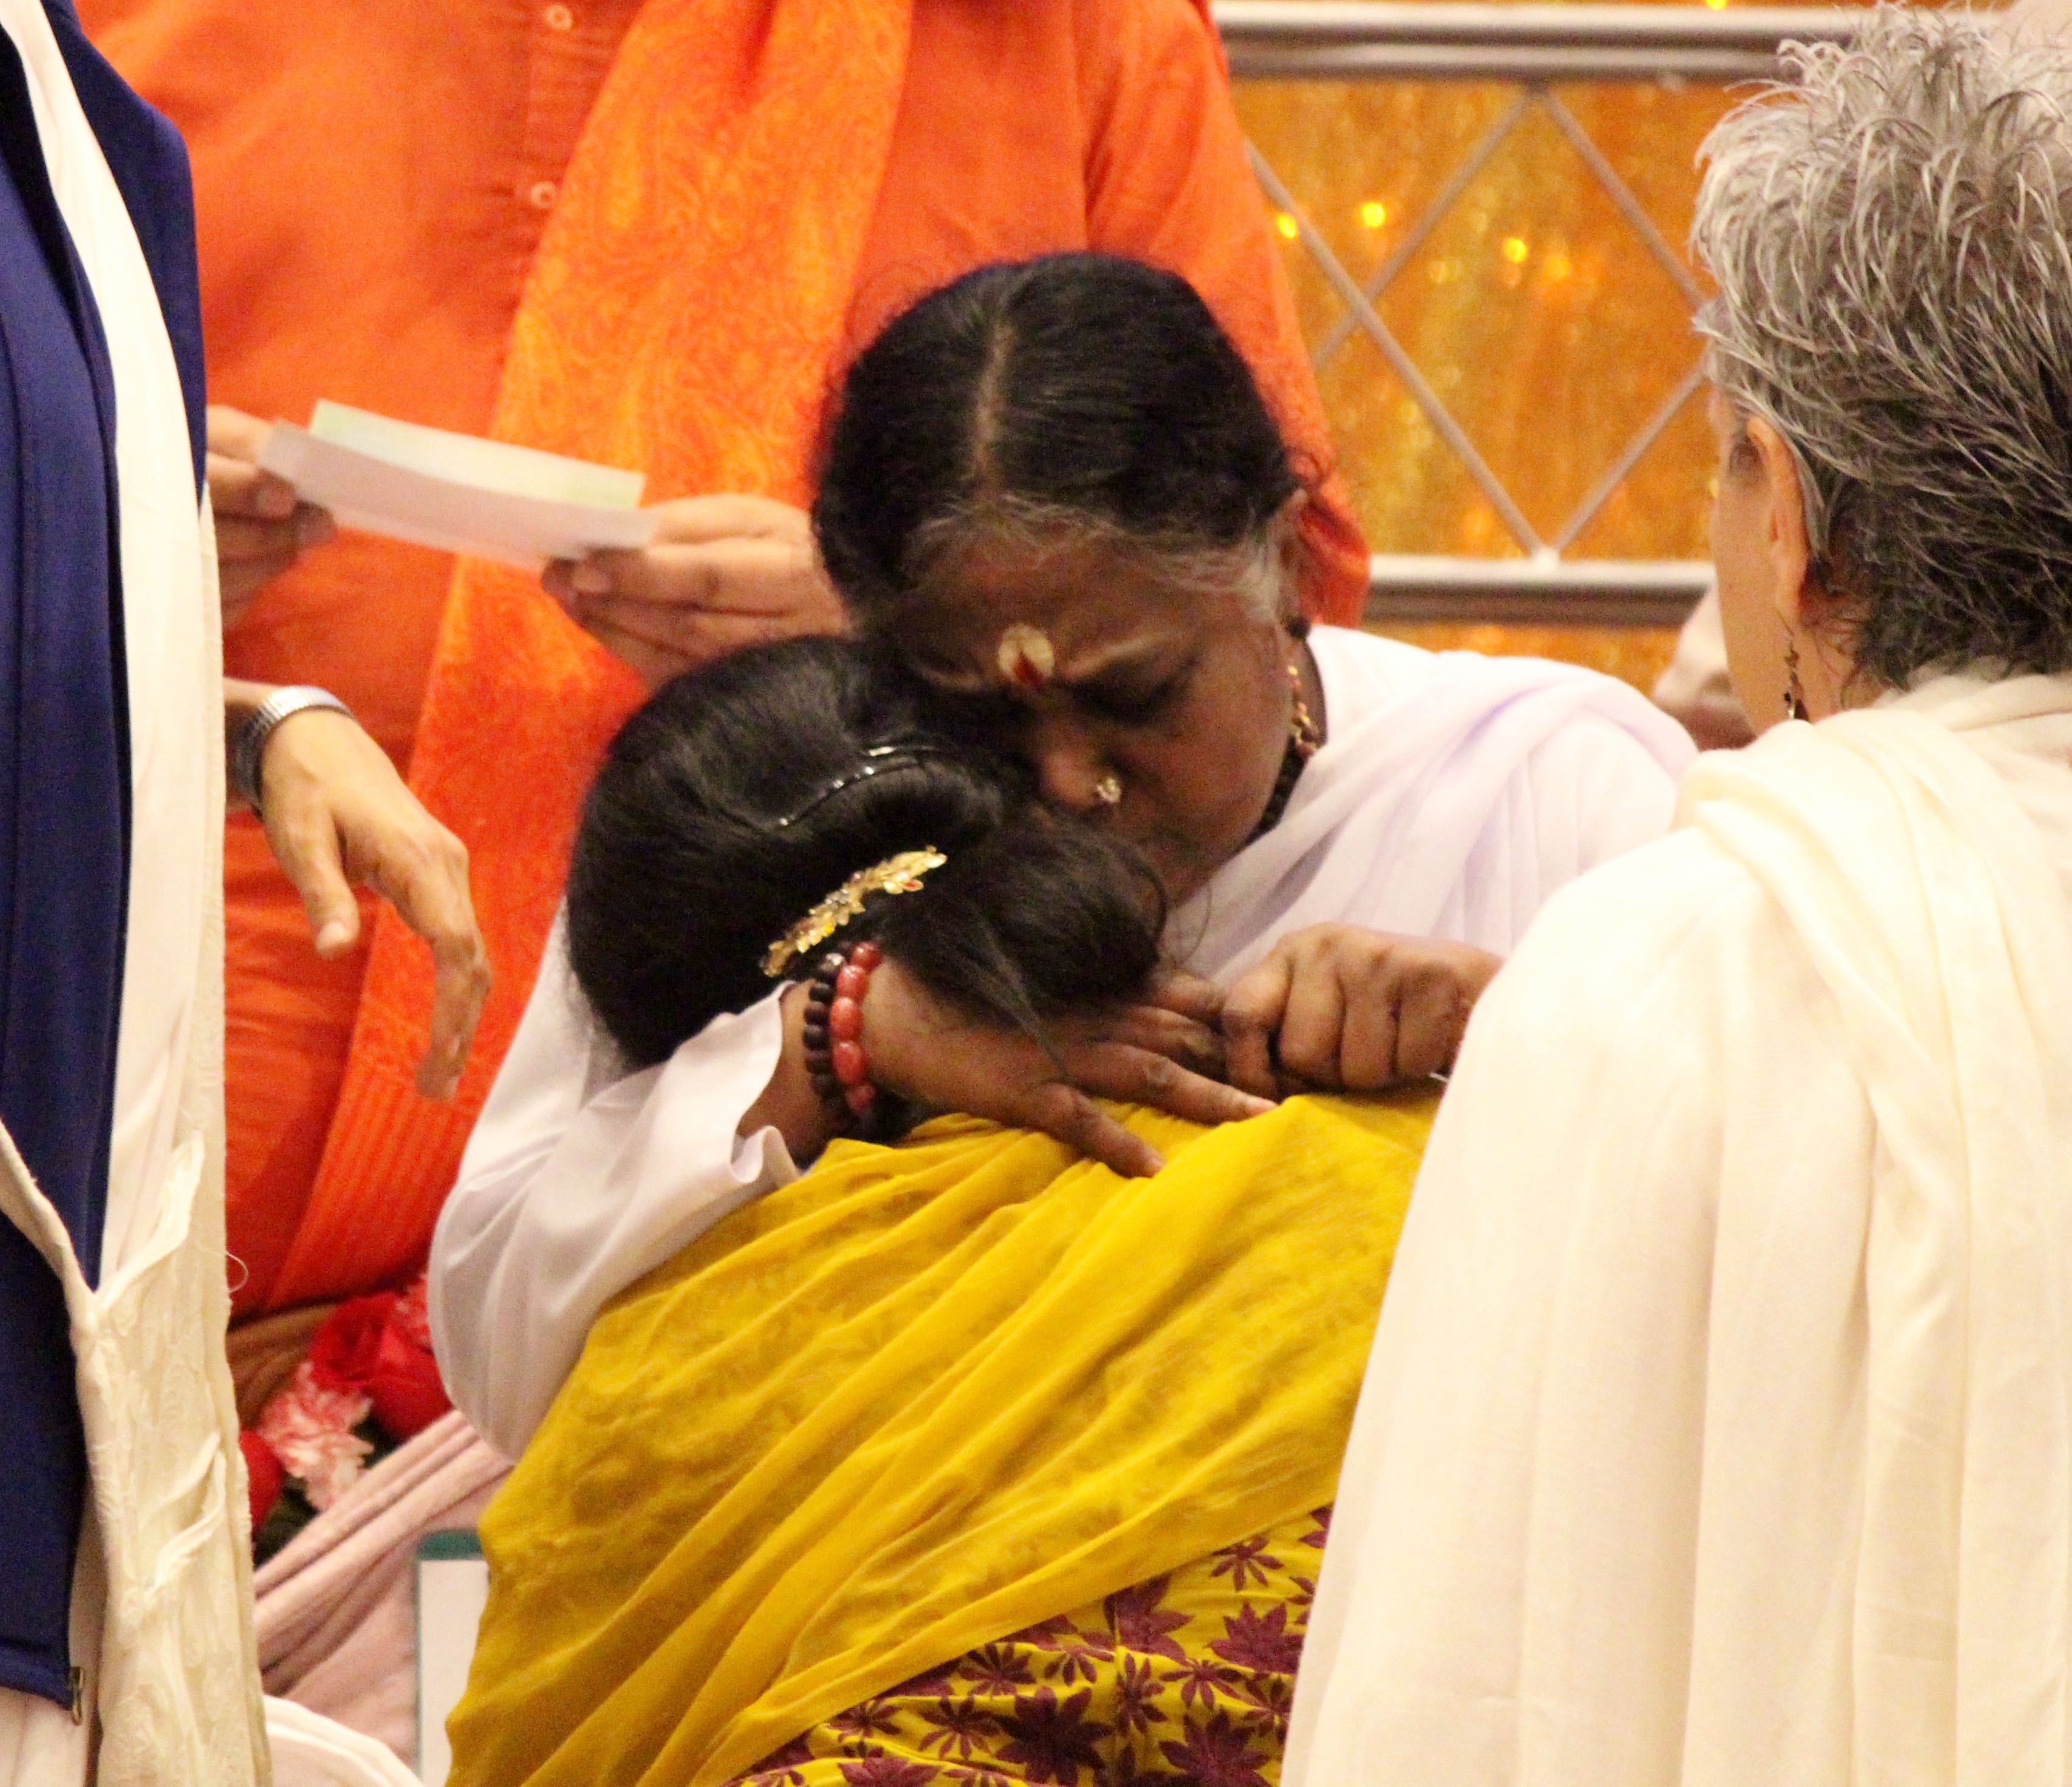 Amma "The Hugging Saint" blessed thousands with her embrace in Los Angeles